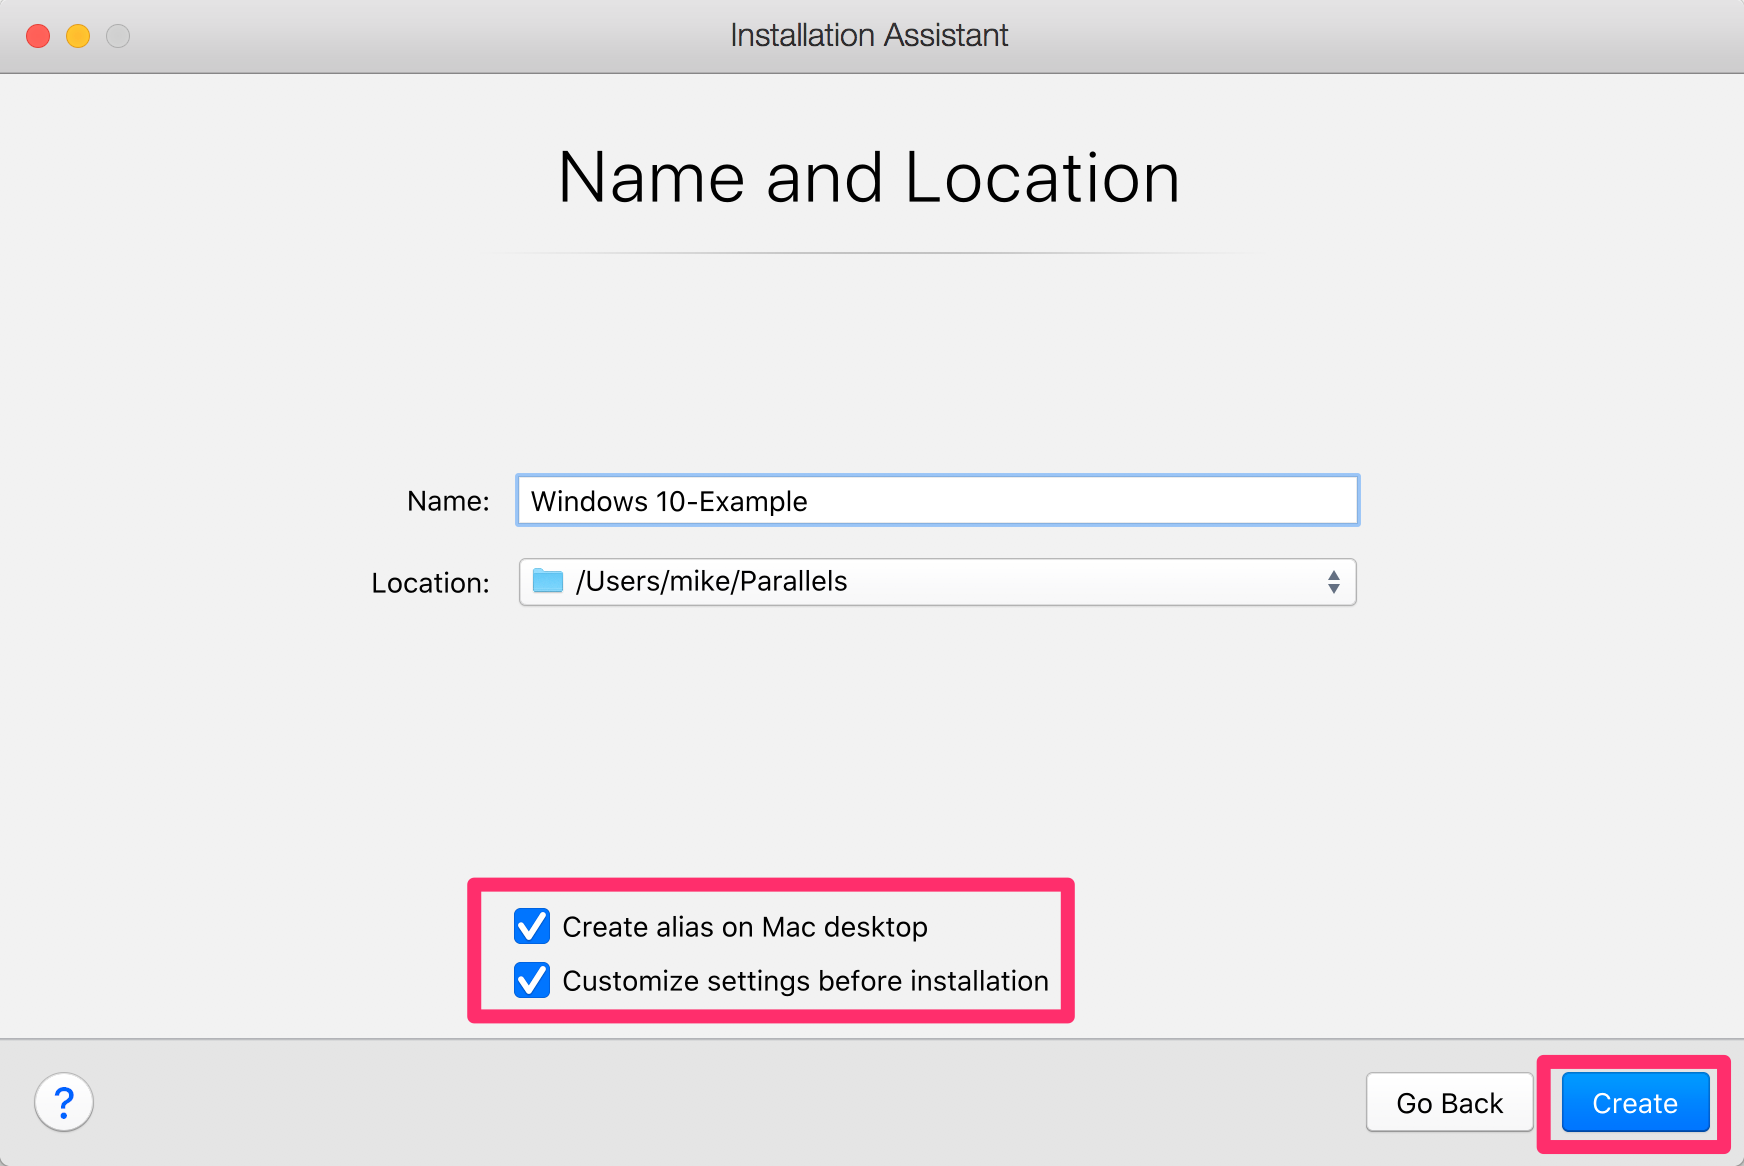 Name and Location screen, Create alias on Mac desktop and Customize settings before installation options